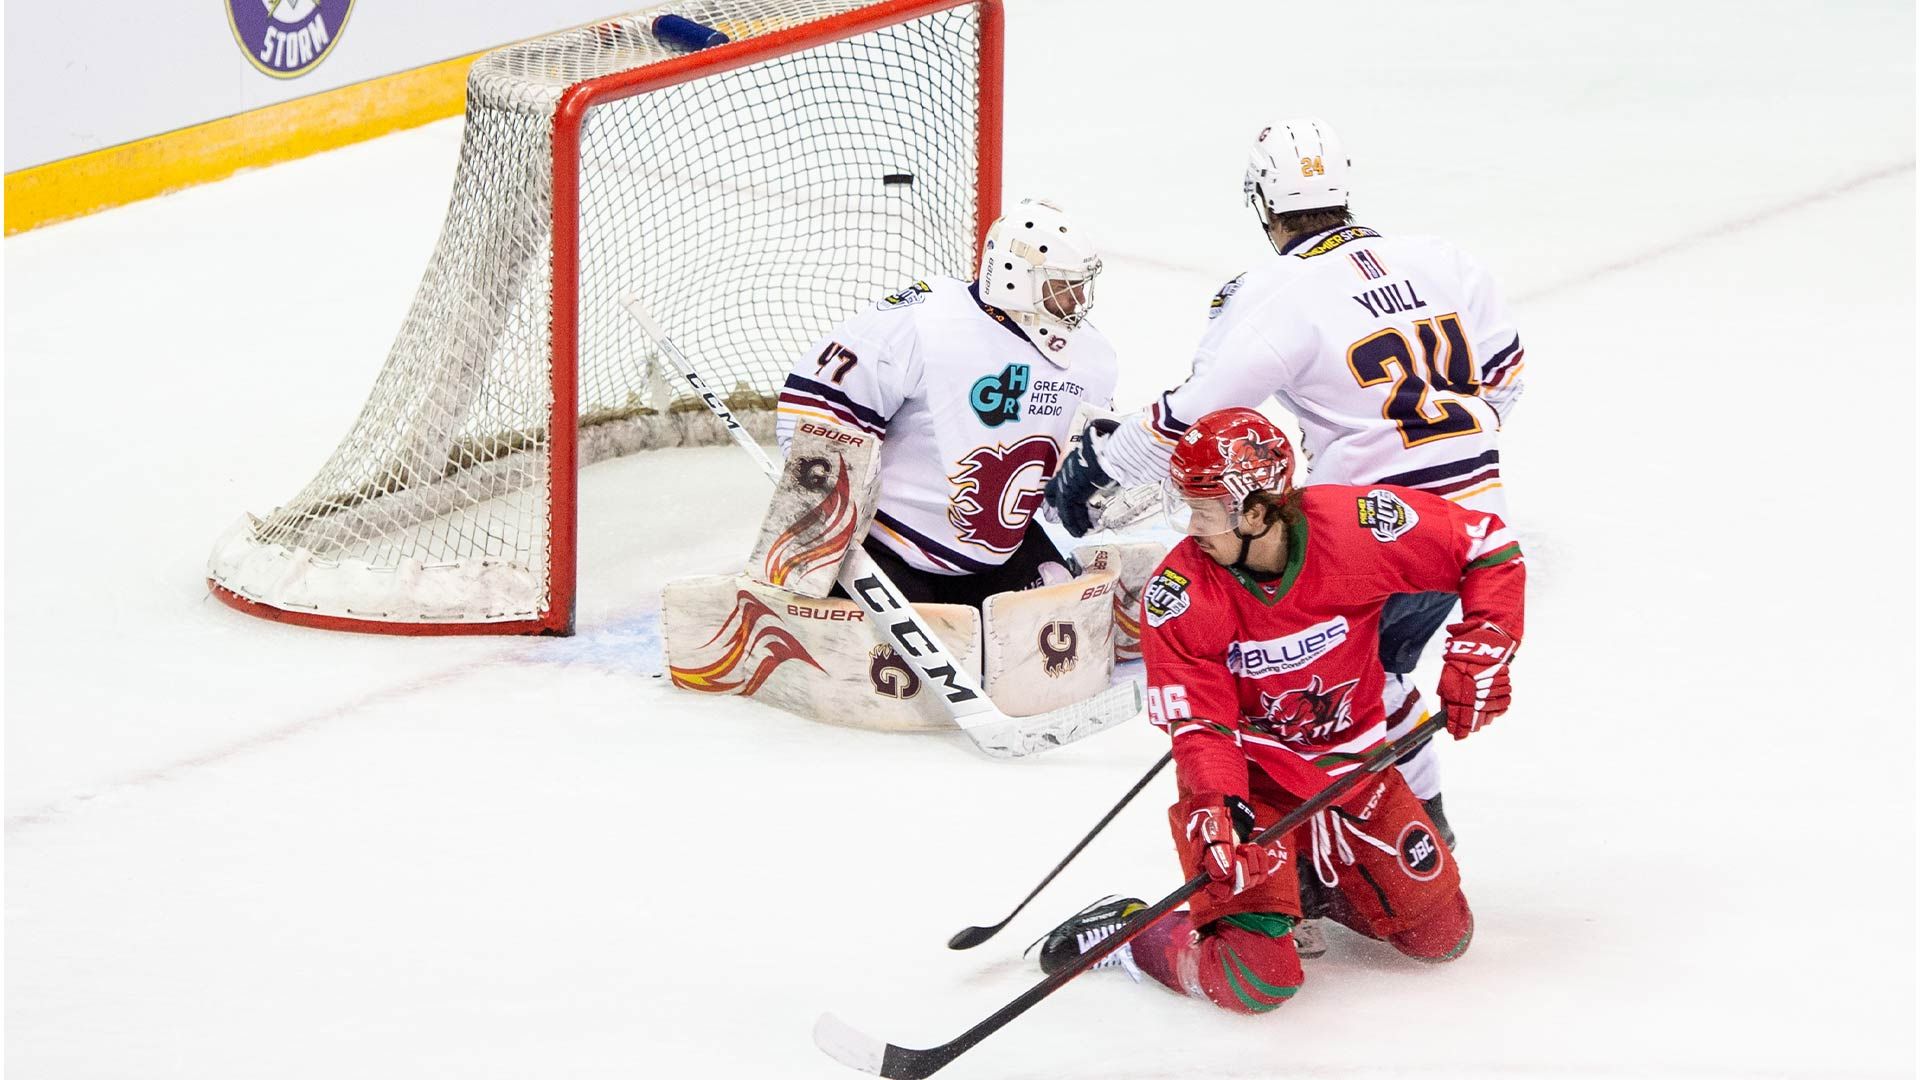 (HC Brodie Dupont) Cole Sandford scored from his knees to give the Cardiff Devils a 2-0 lead over the Guildford Flames in the Elite League Playoff Semi-Finals (Image: James Assinder)